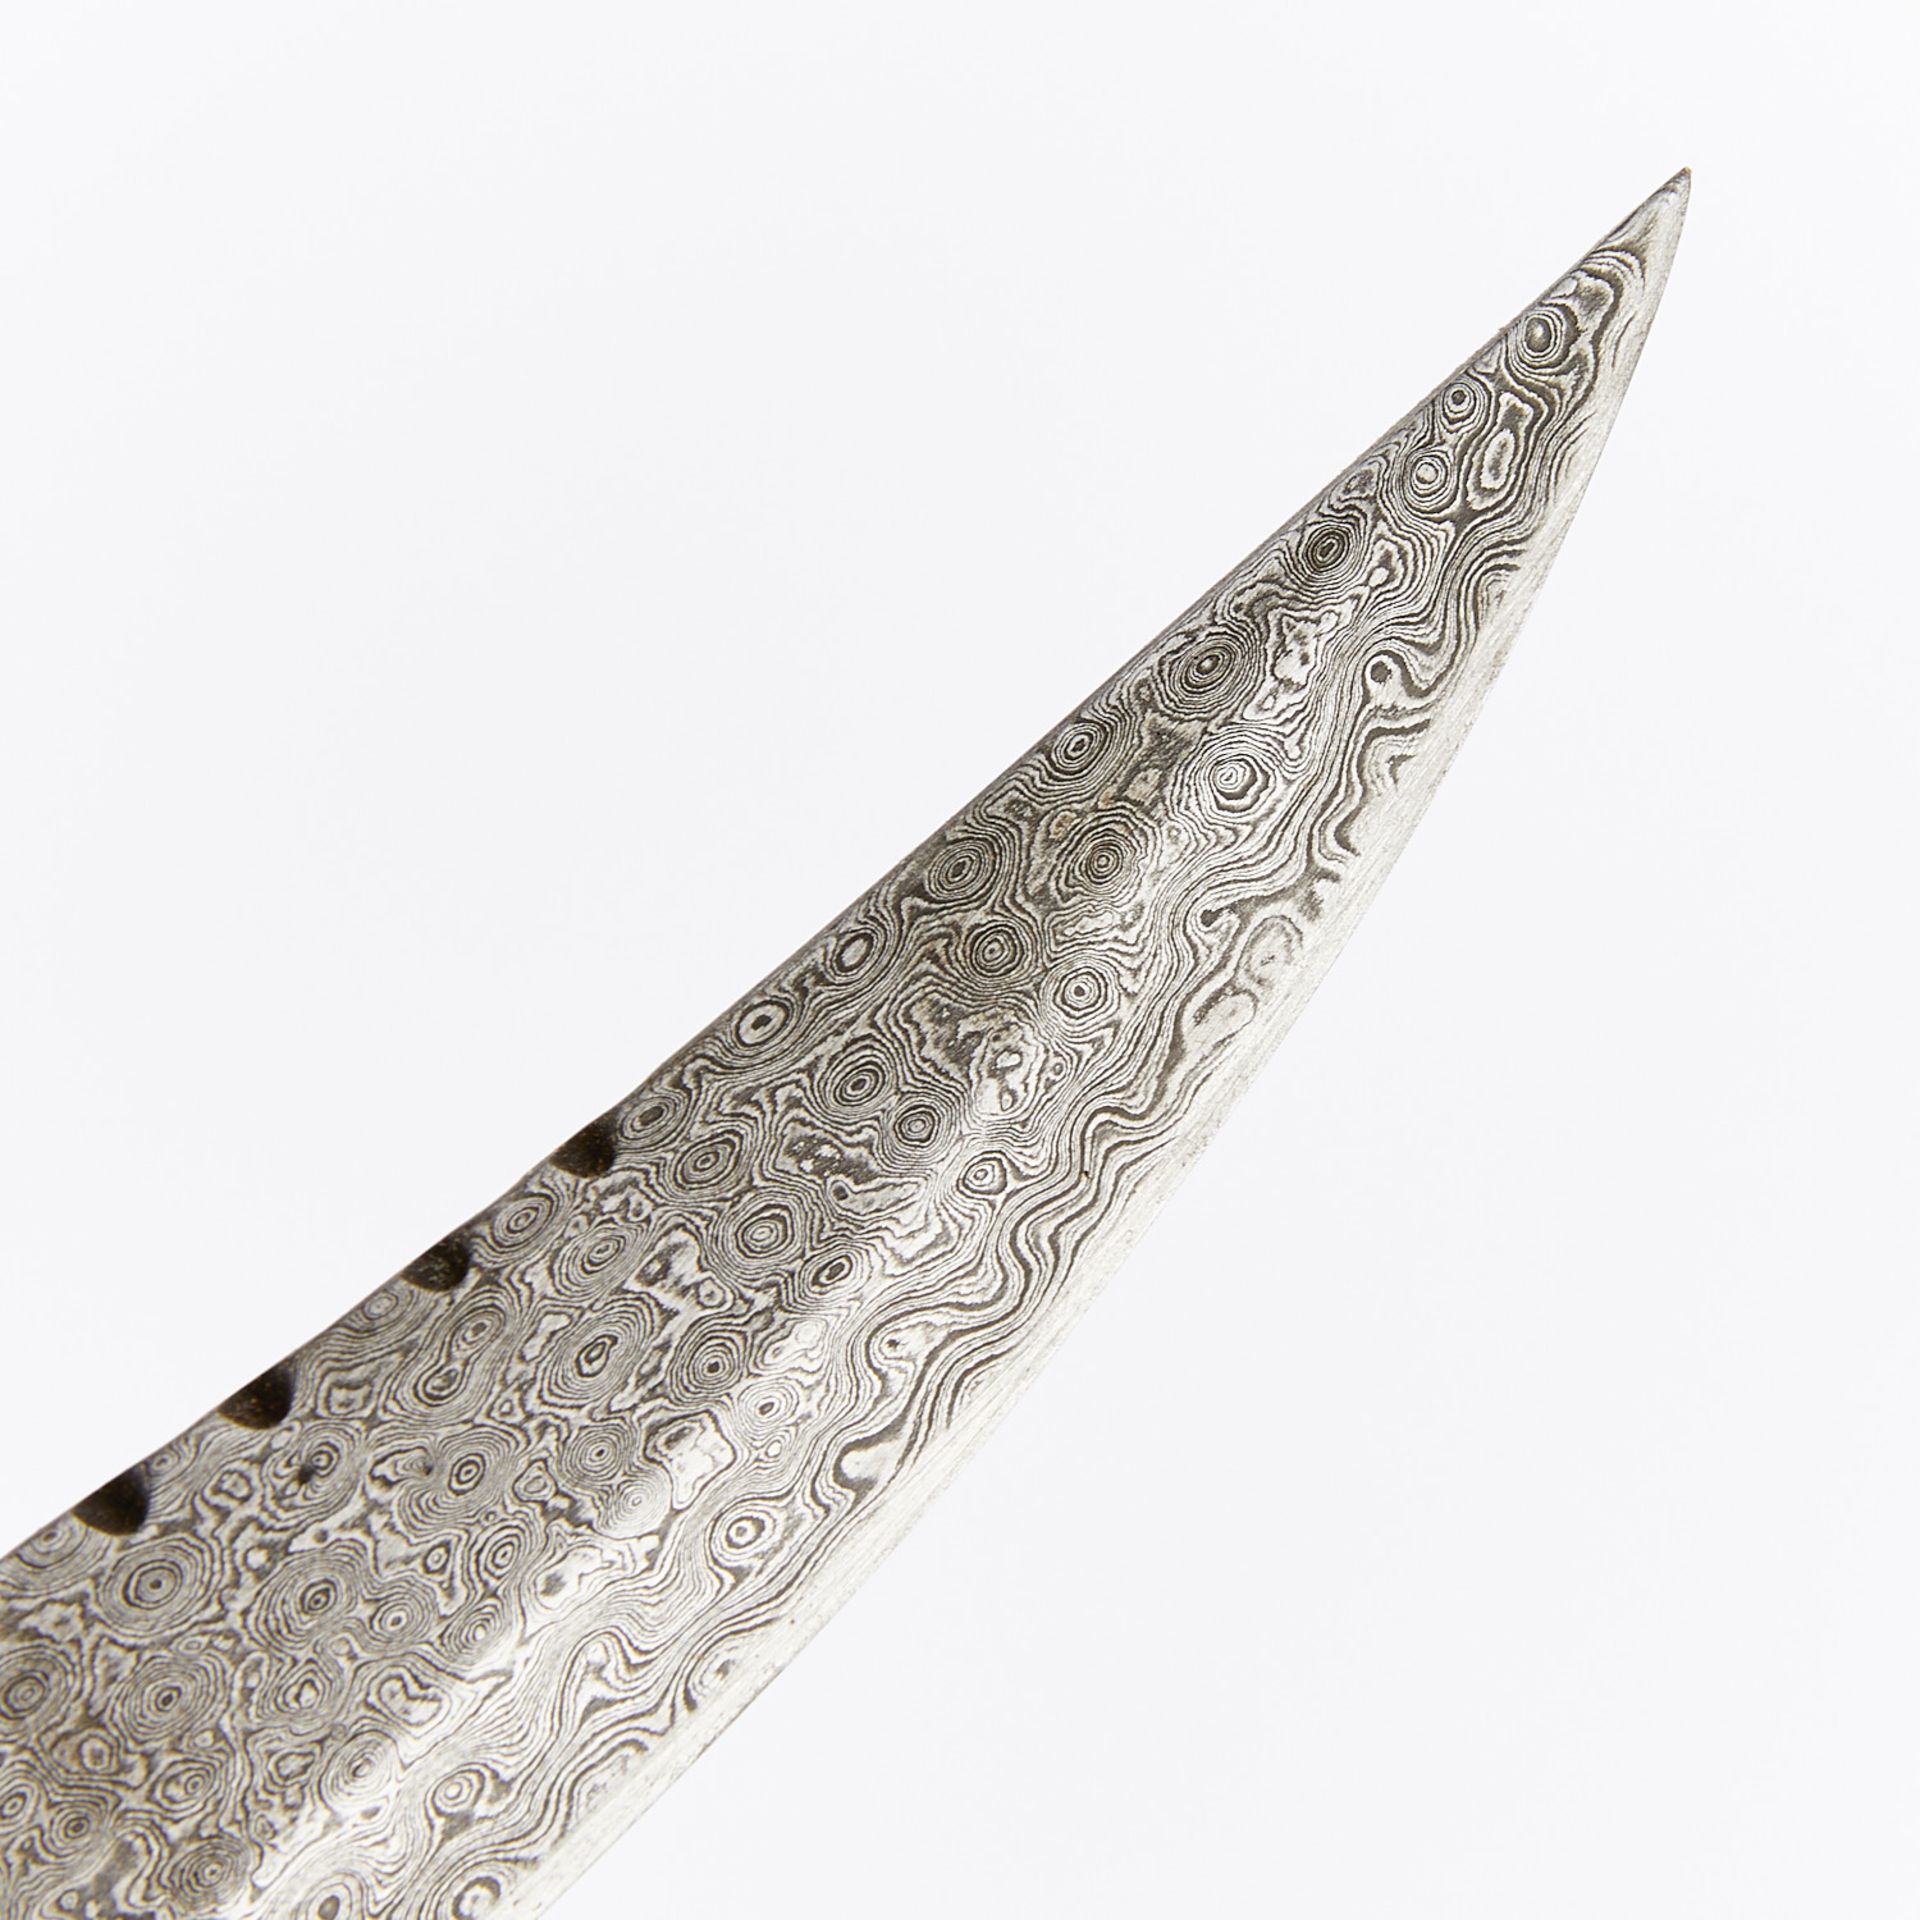 Middle Eastern Mughal Damascus Steel Dagger - Image 2 of 11